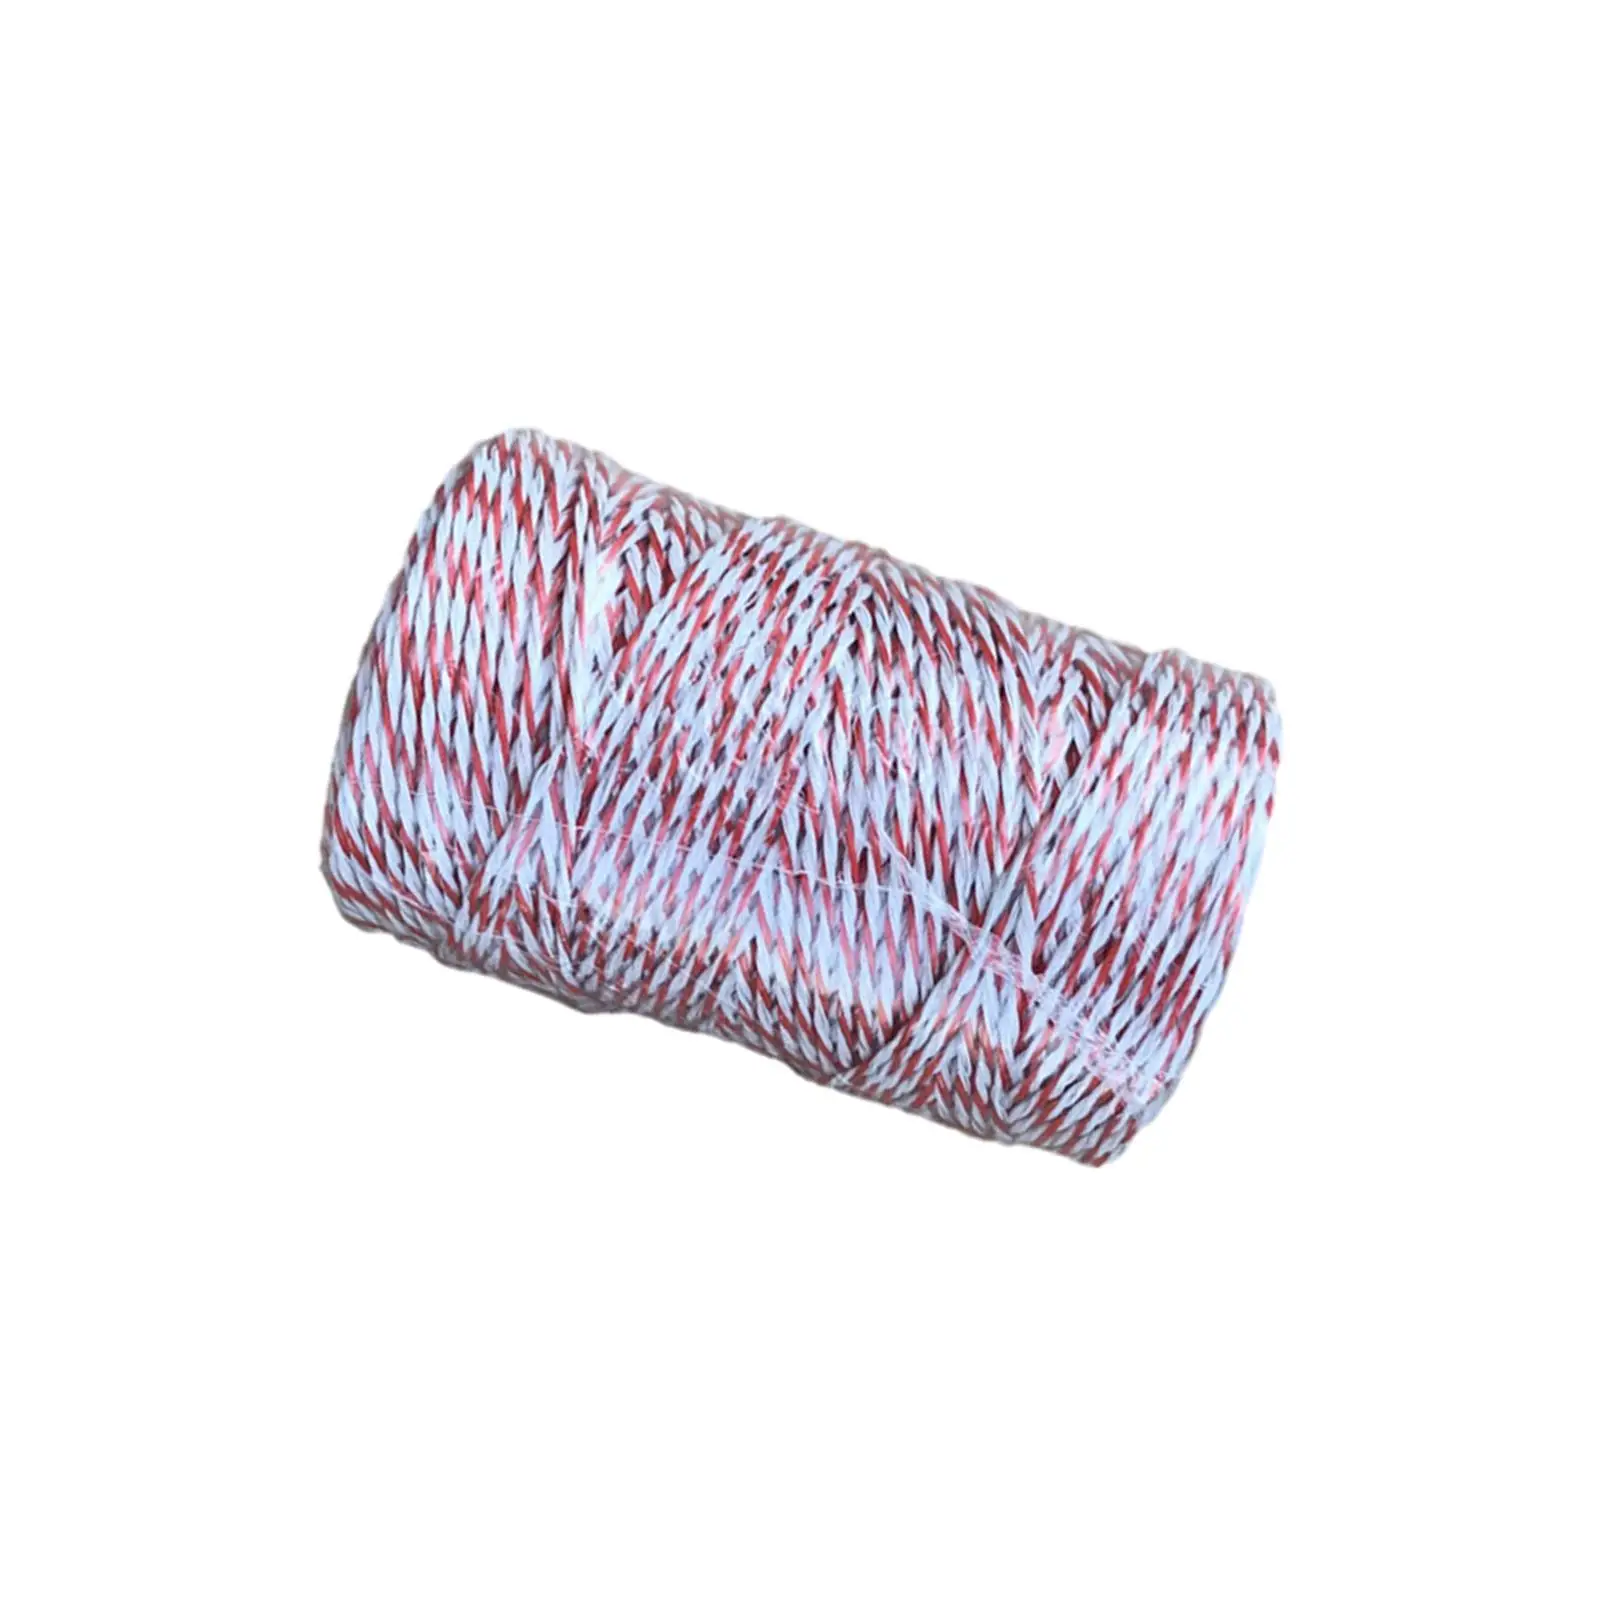 Electric Fence Rope Strong Conductivity Portable Conductive 200M Polywires Power Wire for Sheep Cows Husbandry Dogs Livestock